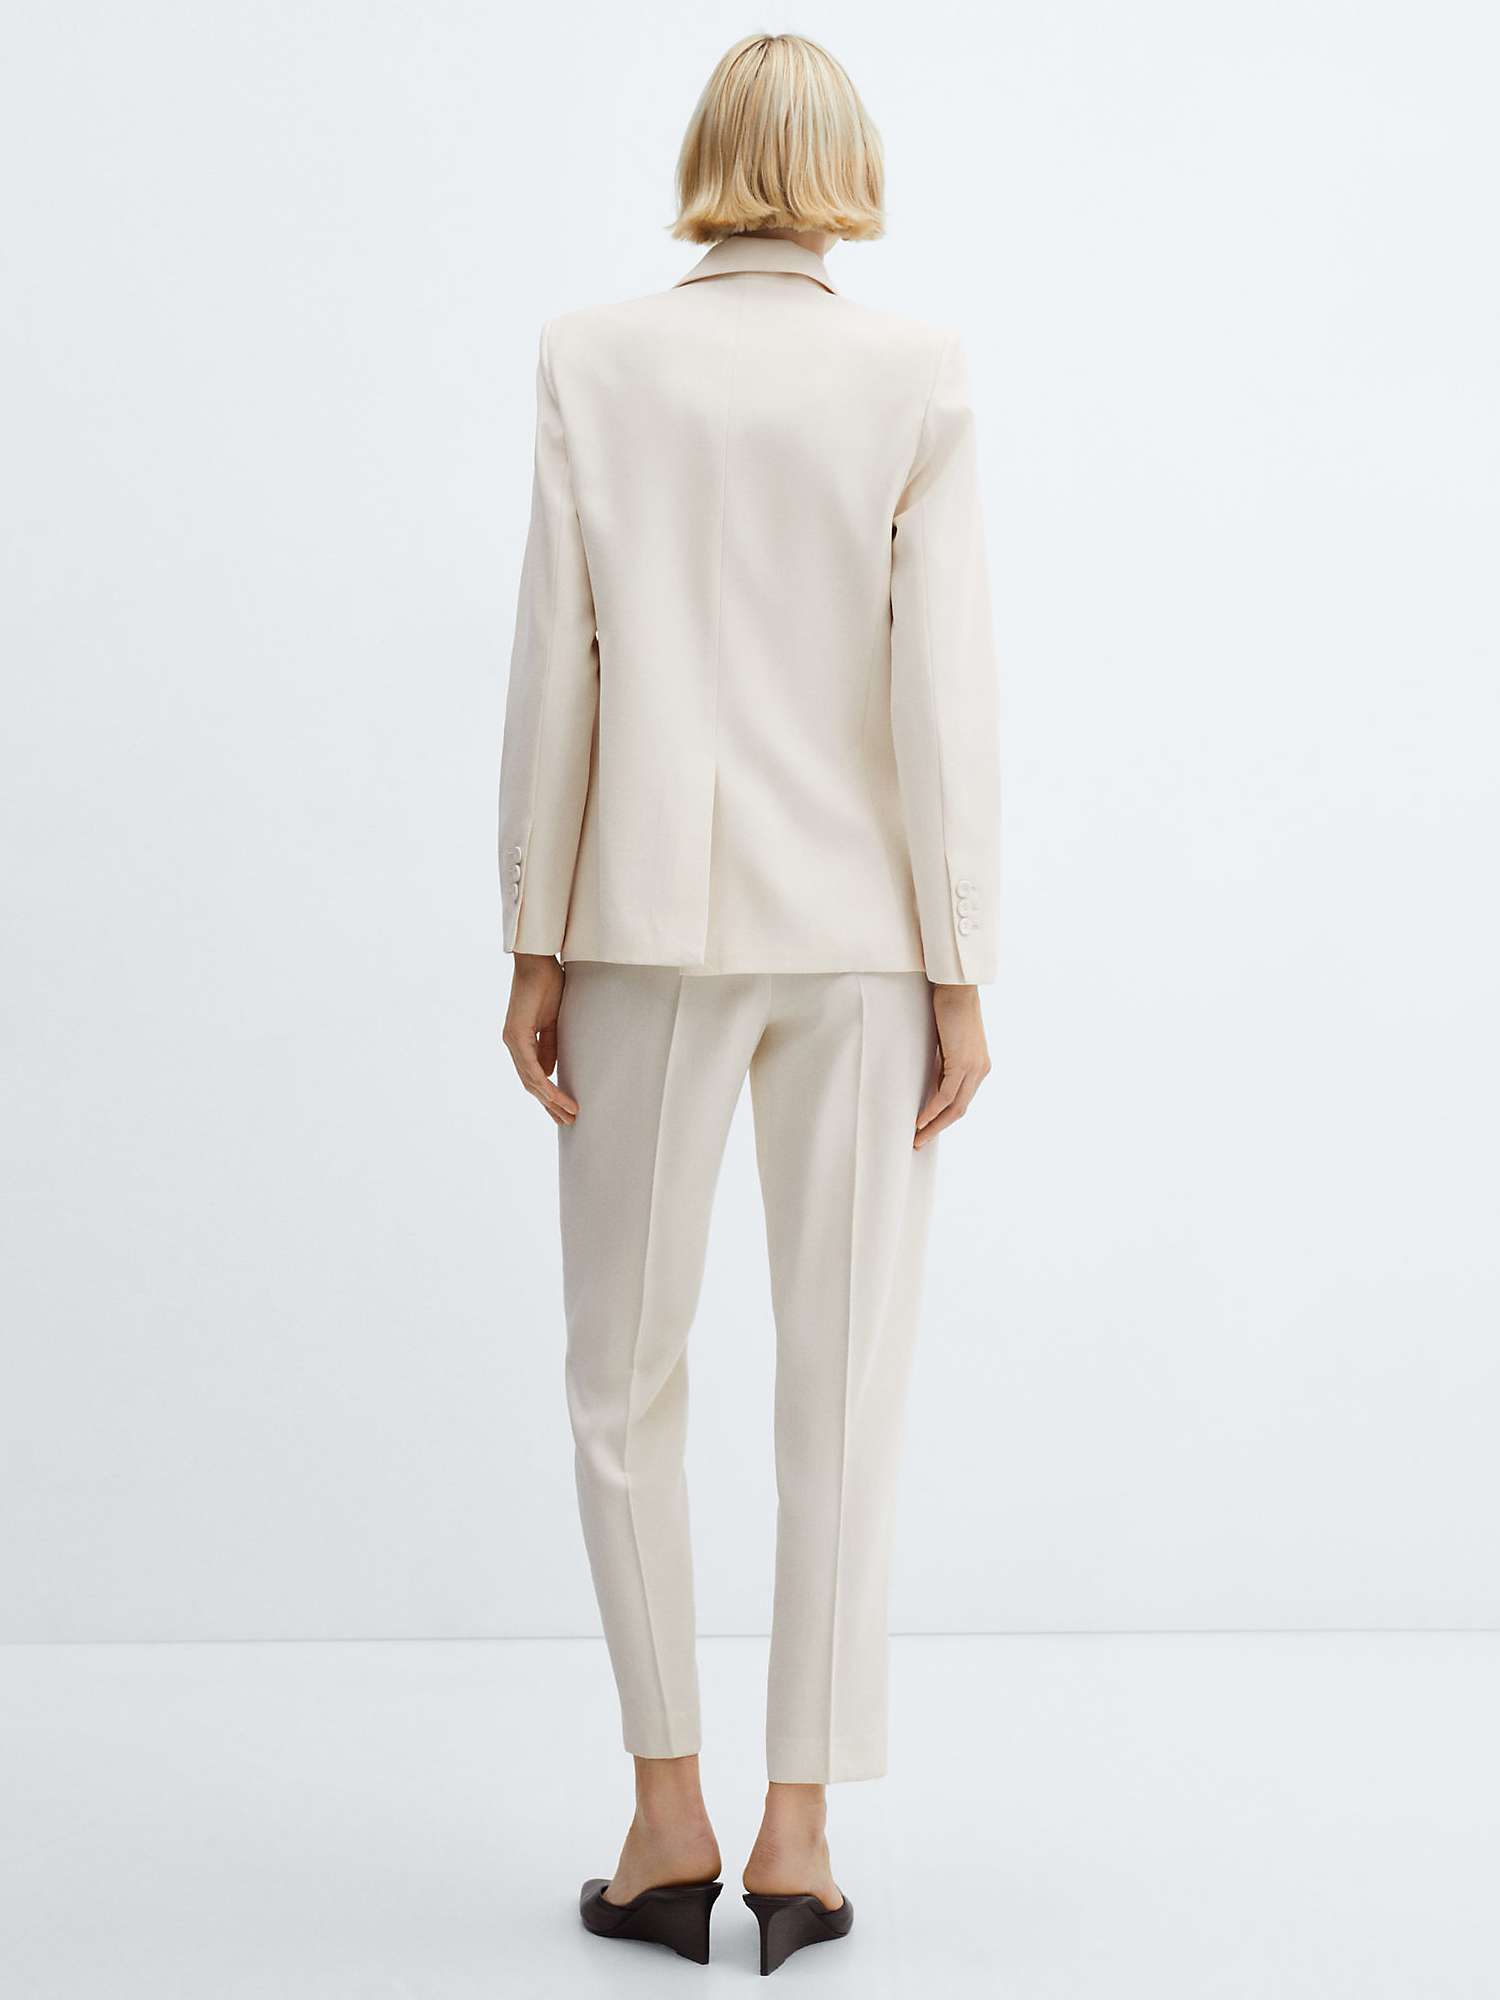 Buy Mango Tempo Straight Suit Trousers Online at johnlewis.com